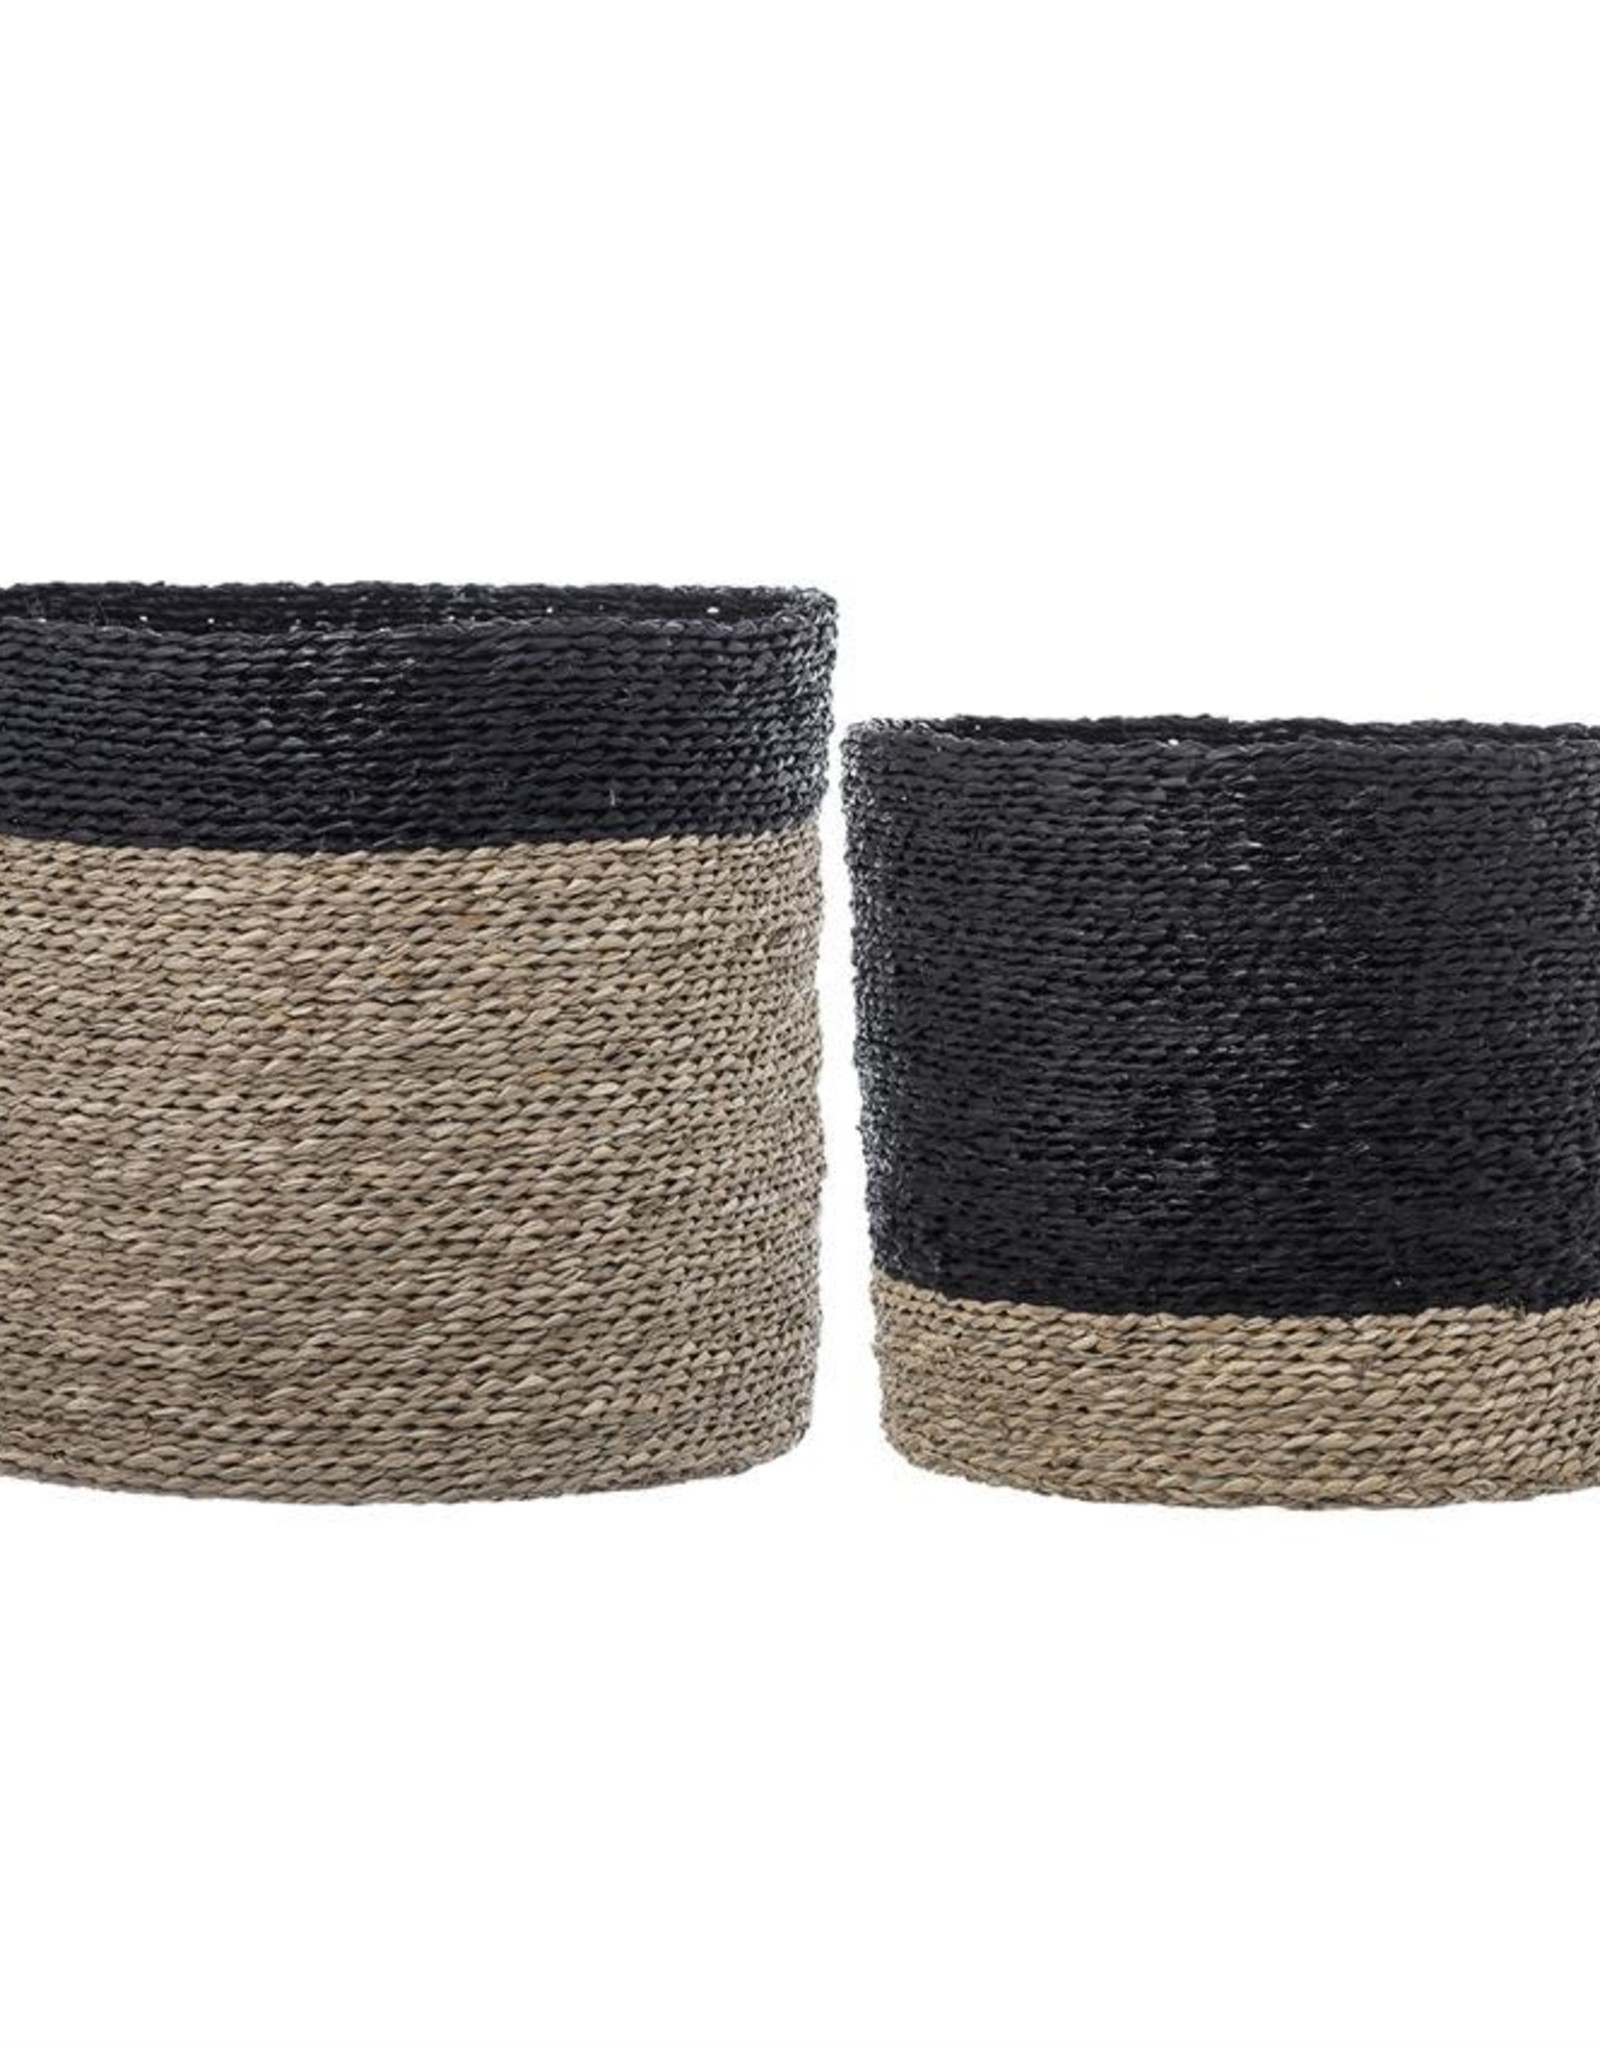 BASKET NATURAL AND BLACK SEAGRASS